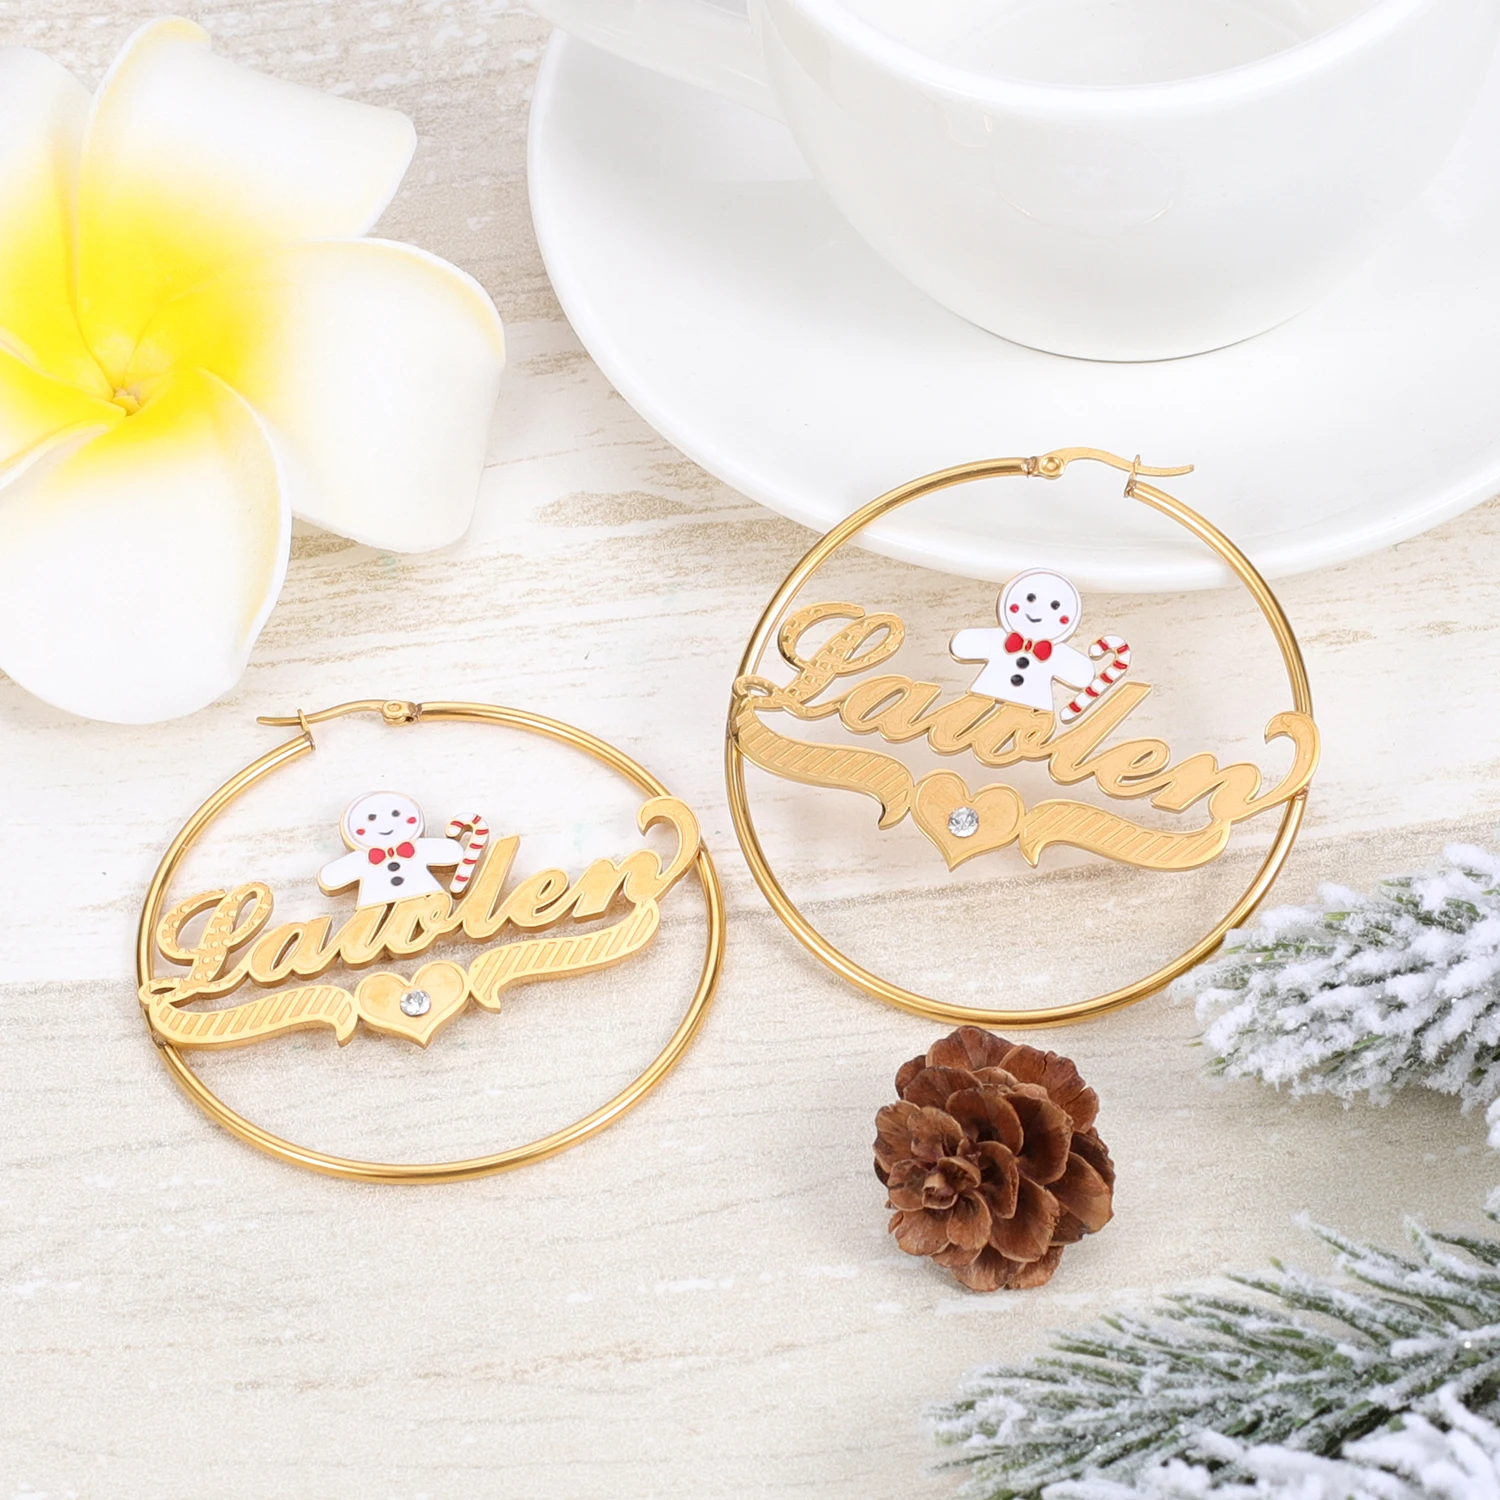 New Christmas Jewelry Customized Earrings Name Two Tone 18K Gold Plated Snowman Personalized Hoop Name Earrings for Women Girls